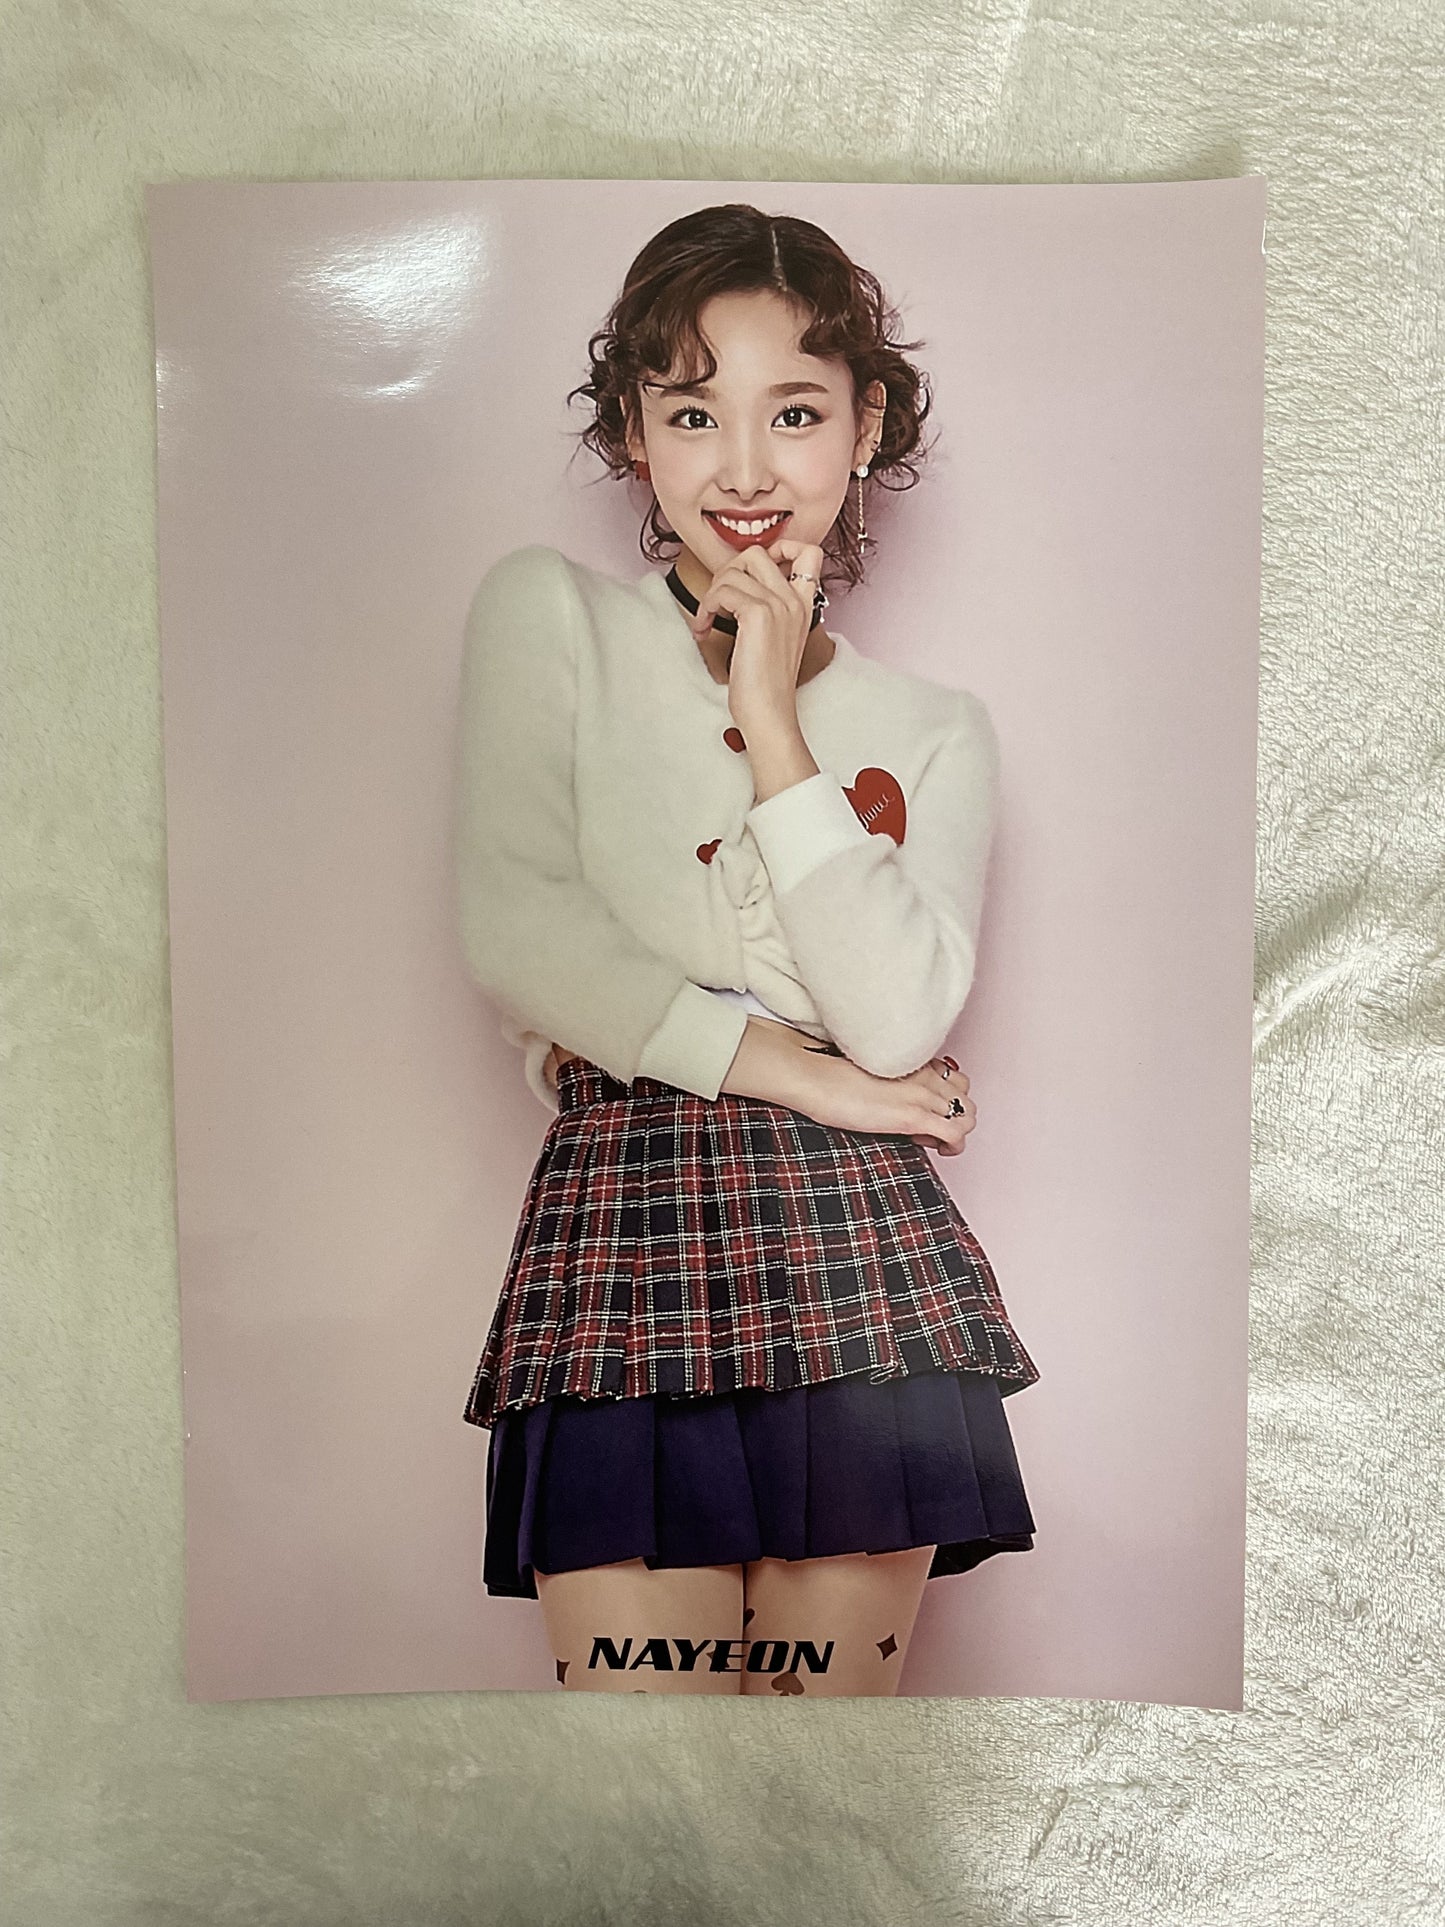 [ON HAND] A3 GLOSSY POSTERS (TWICE NAYEON)